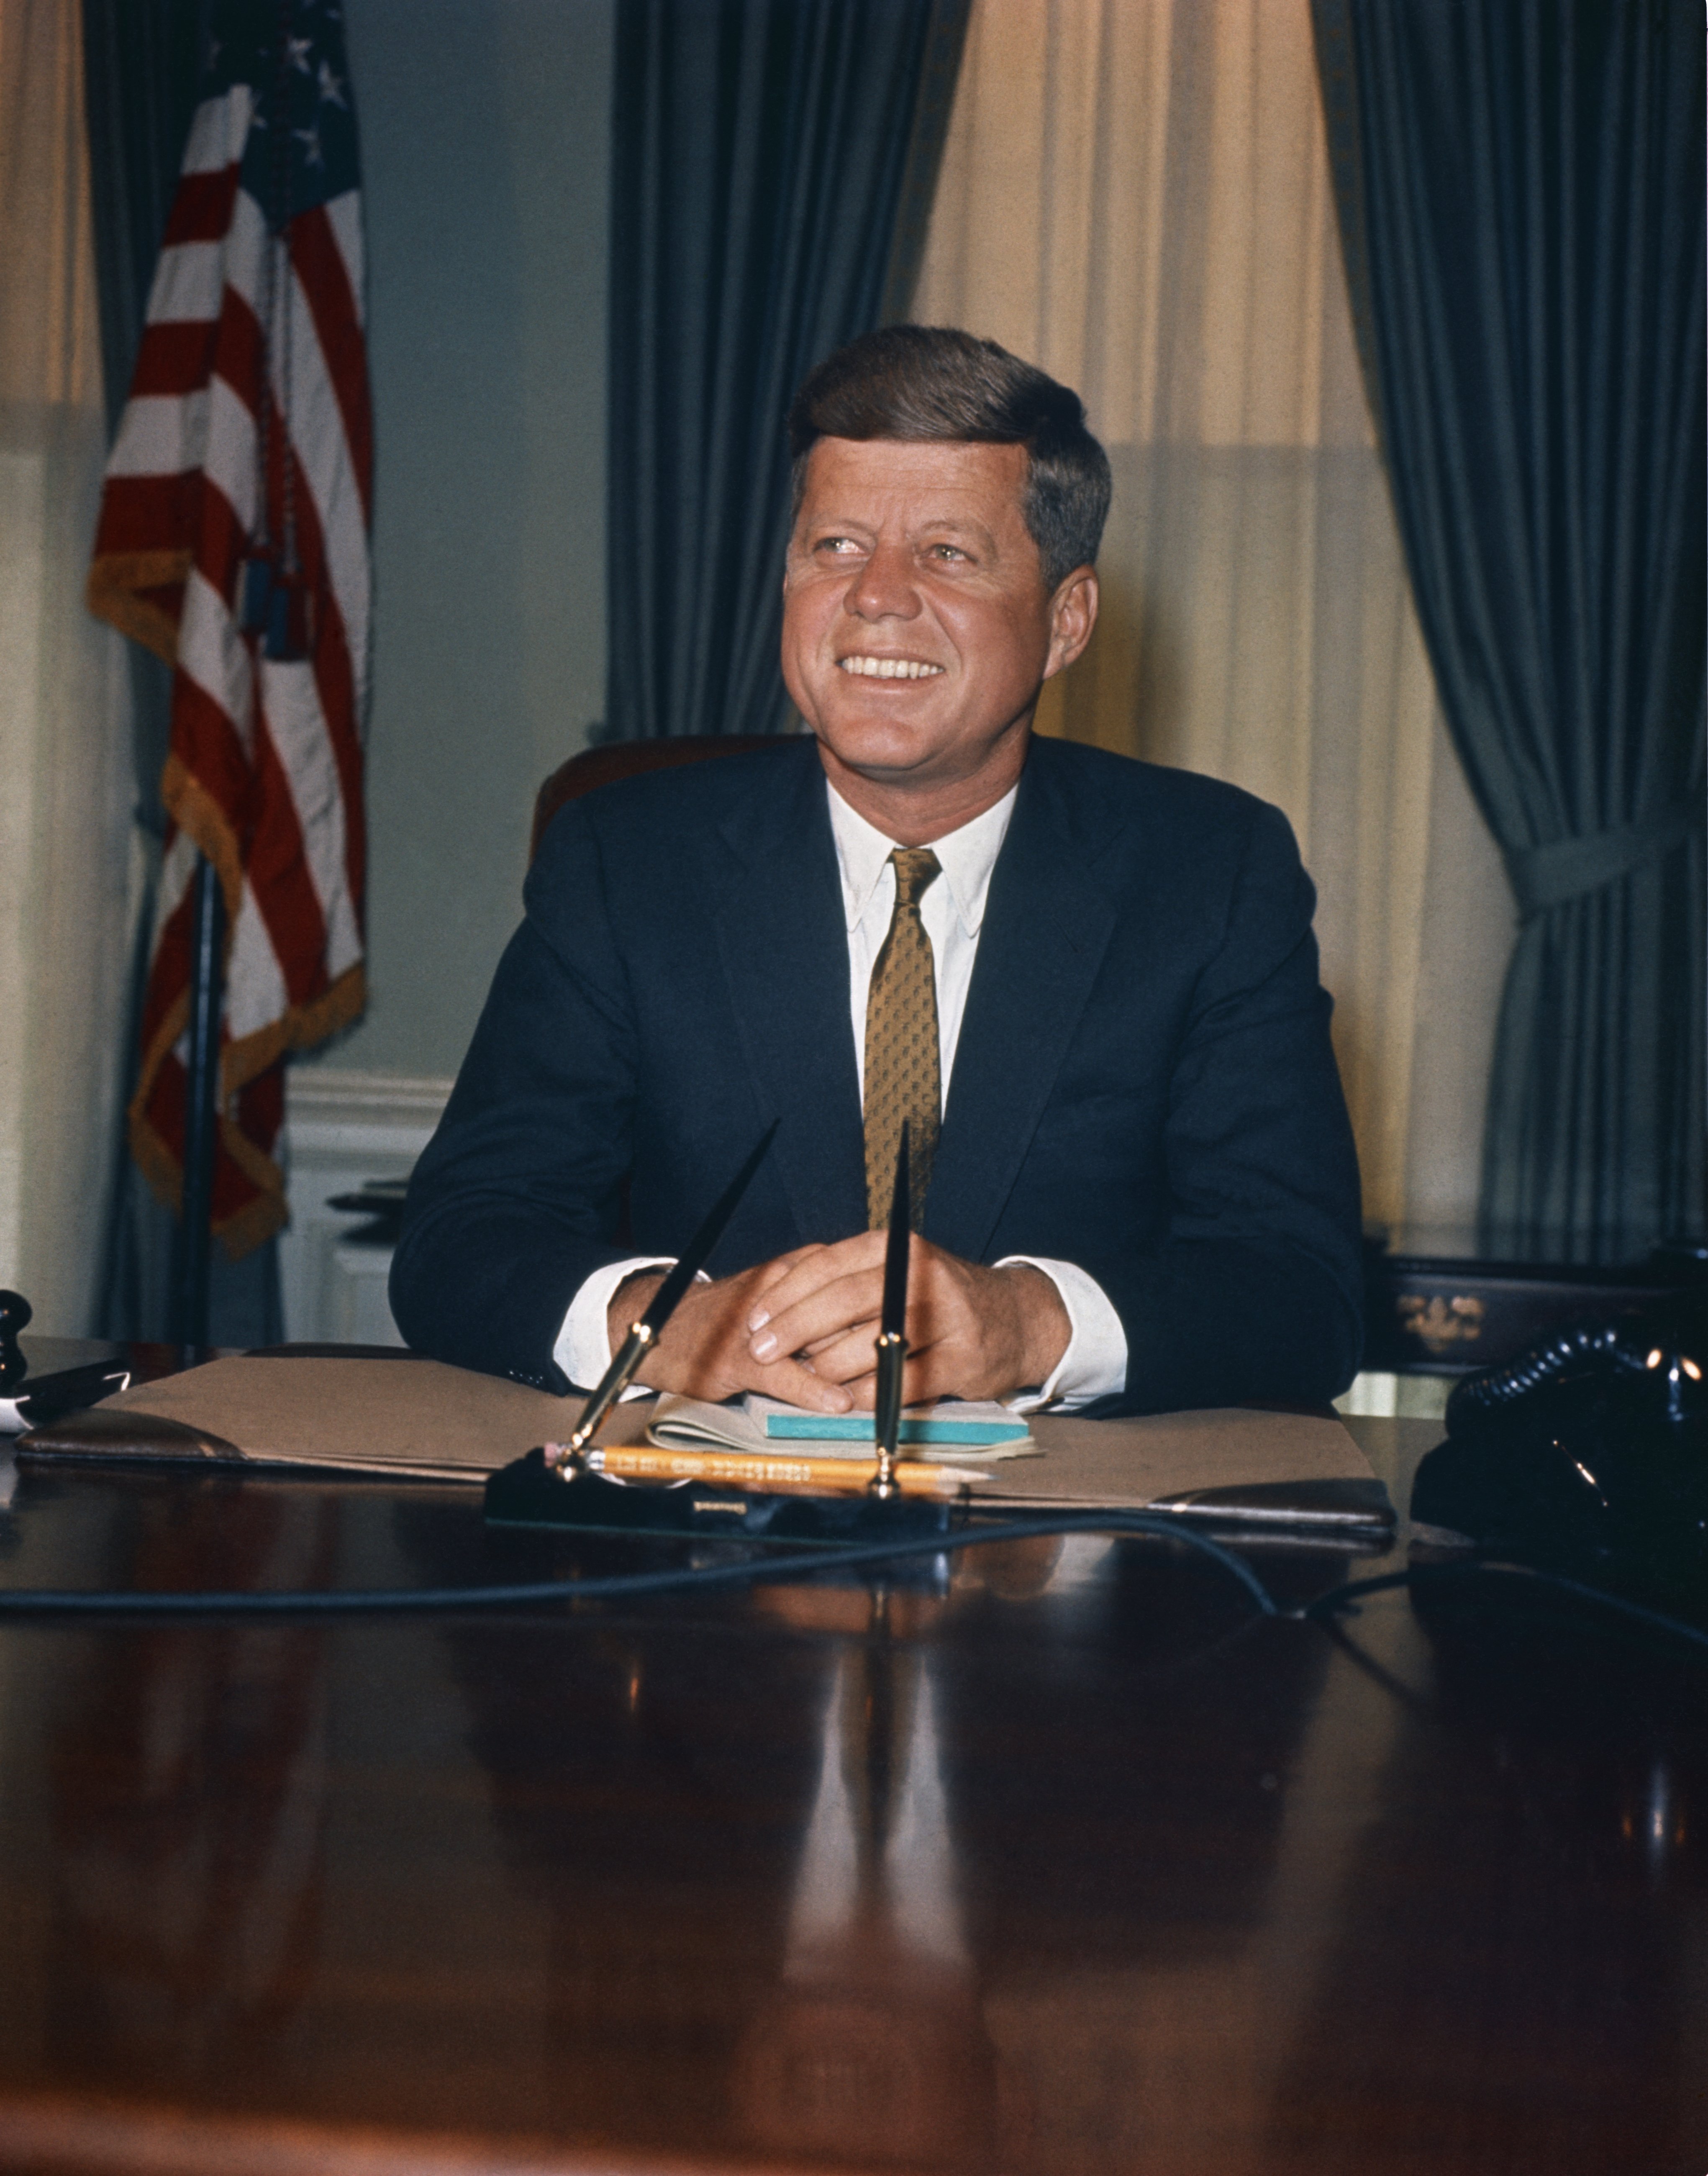 John F. Kennedy pictured at his desk in Oval Office in The White House. | Photo: Getty Images